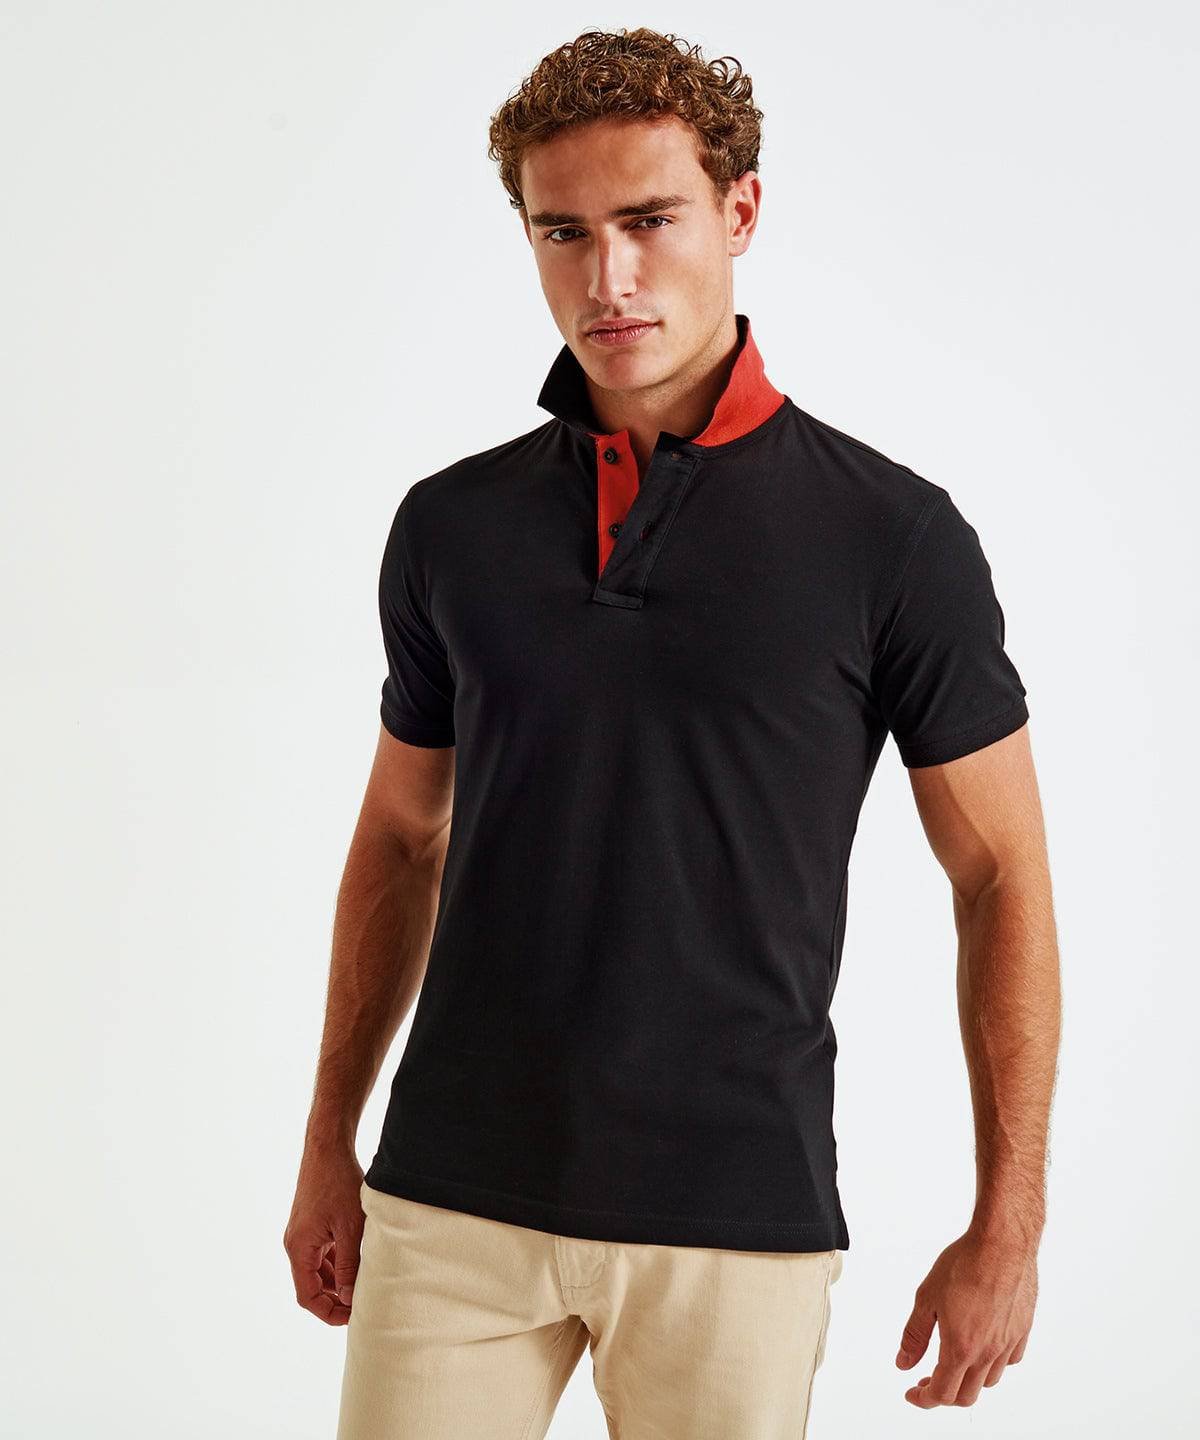 Navy/White - Men's classic fit contrast polo